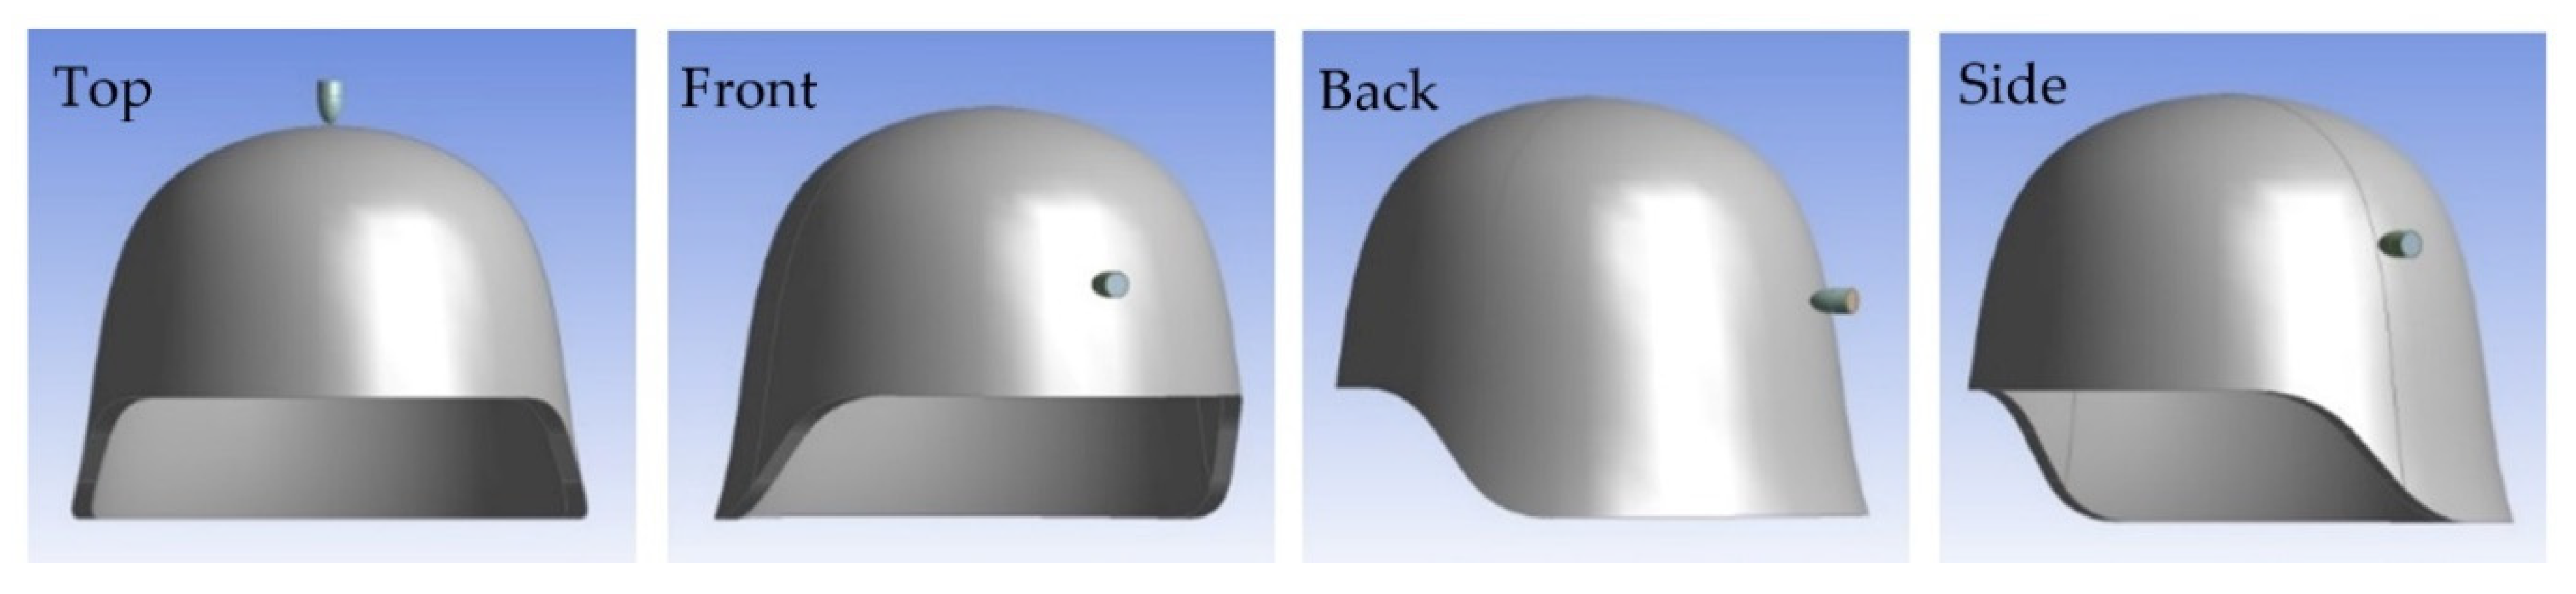 Polymers | Free Full-Text | Development of Lightweight and High-Performance  Ballistic Helmet Based on Poly(Benzoxazine-co-Urethane) Matrix Reinforced  with Aramid Fabric and Multi-Walled Carbon Nanotubes | HTML